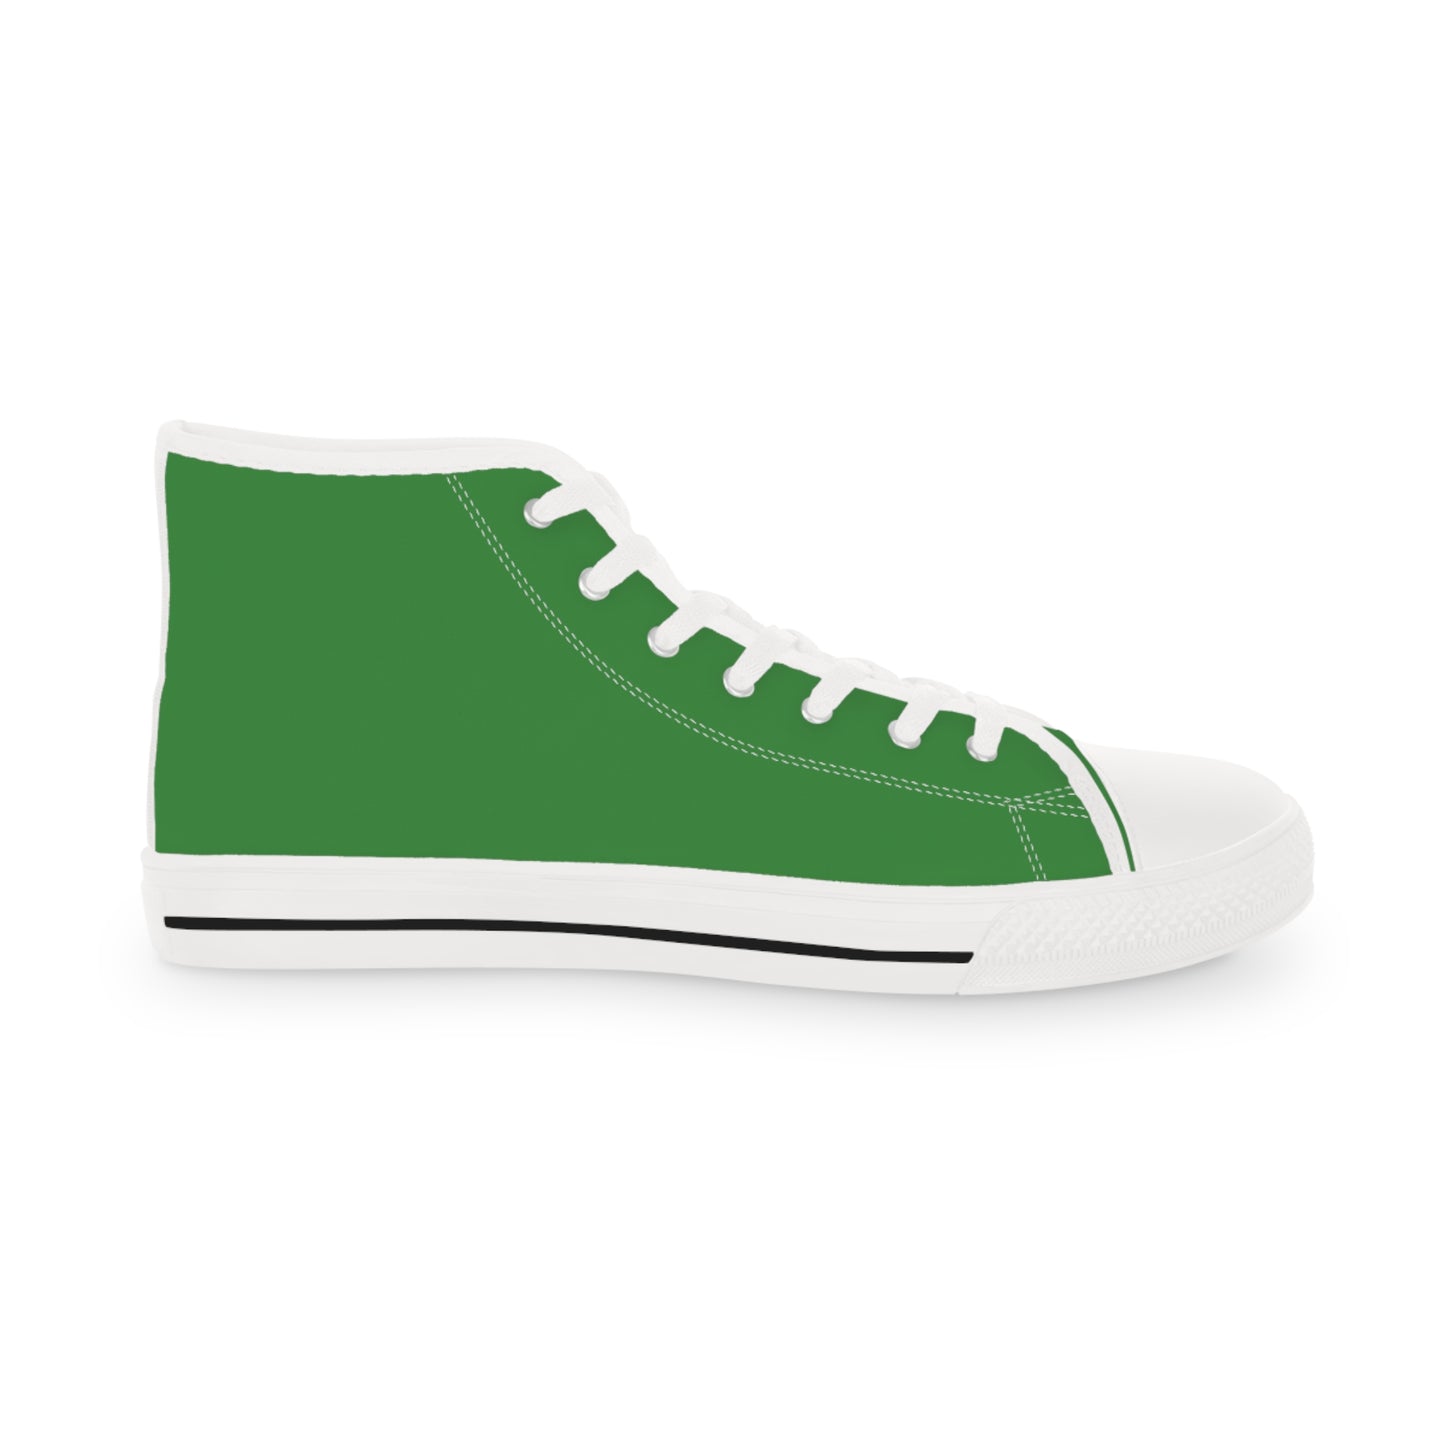 Men's High Top Sneakers - Green US 14 White sole